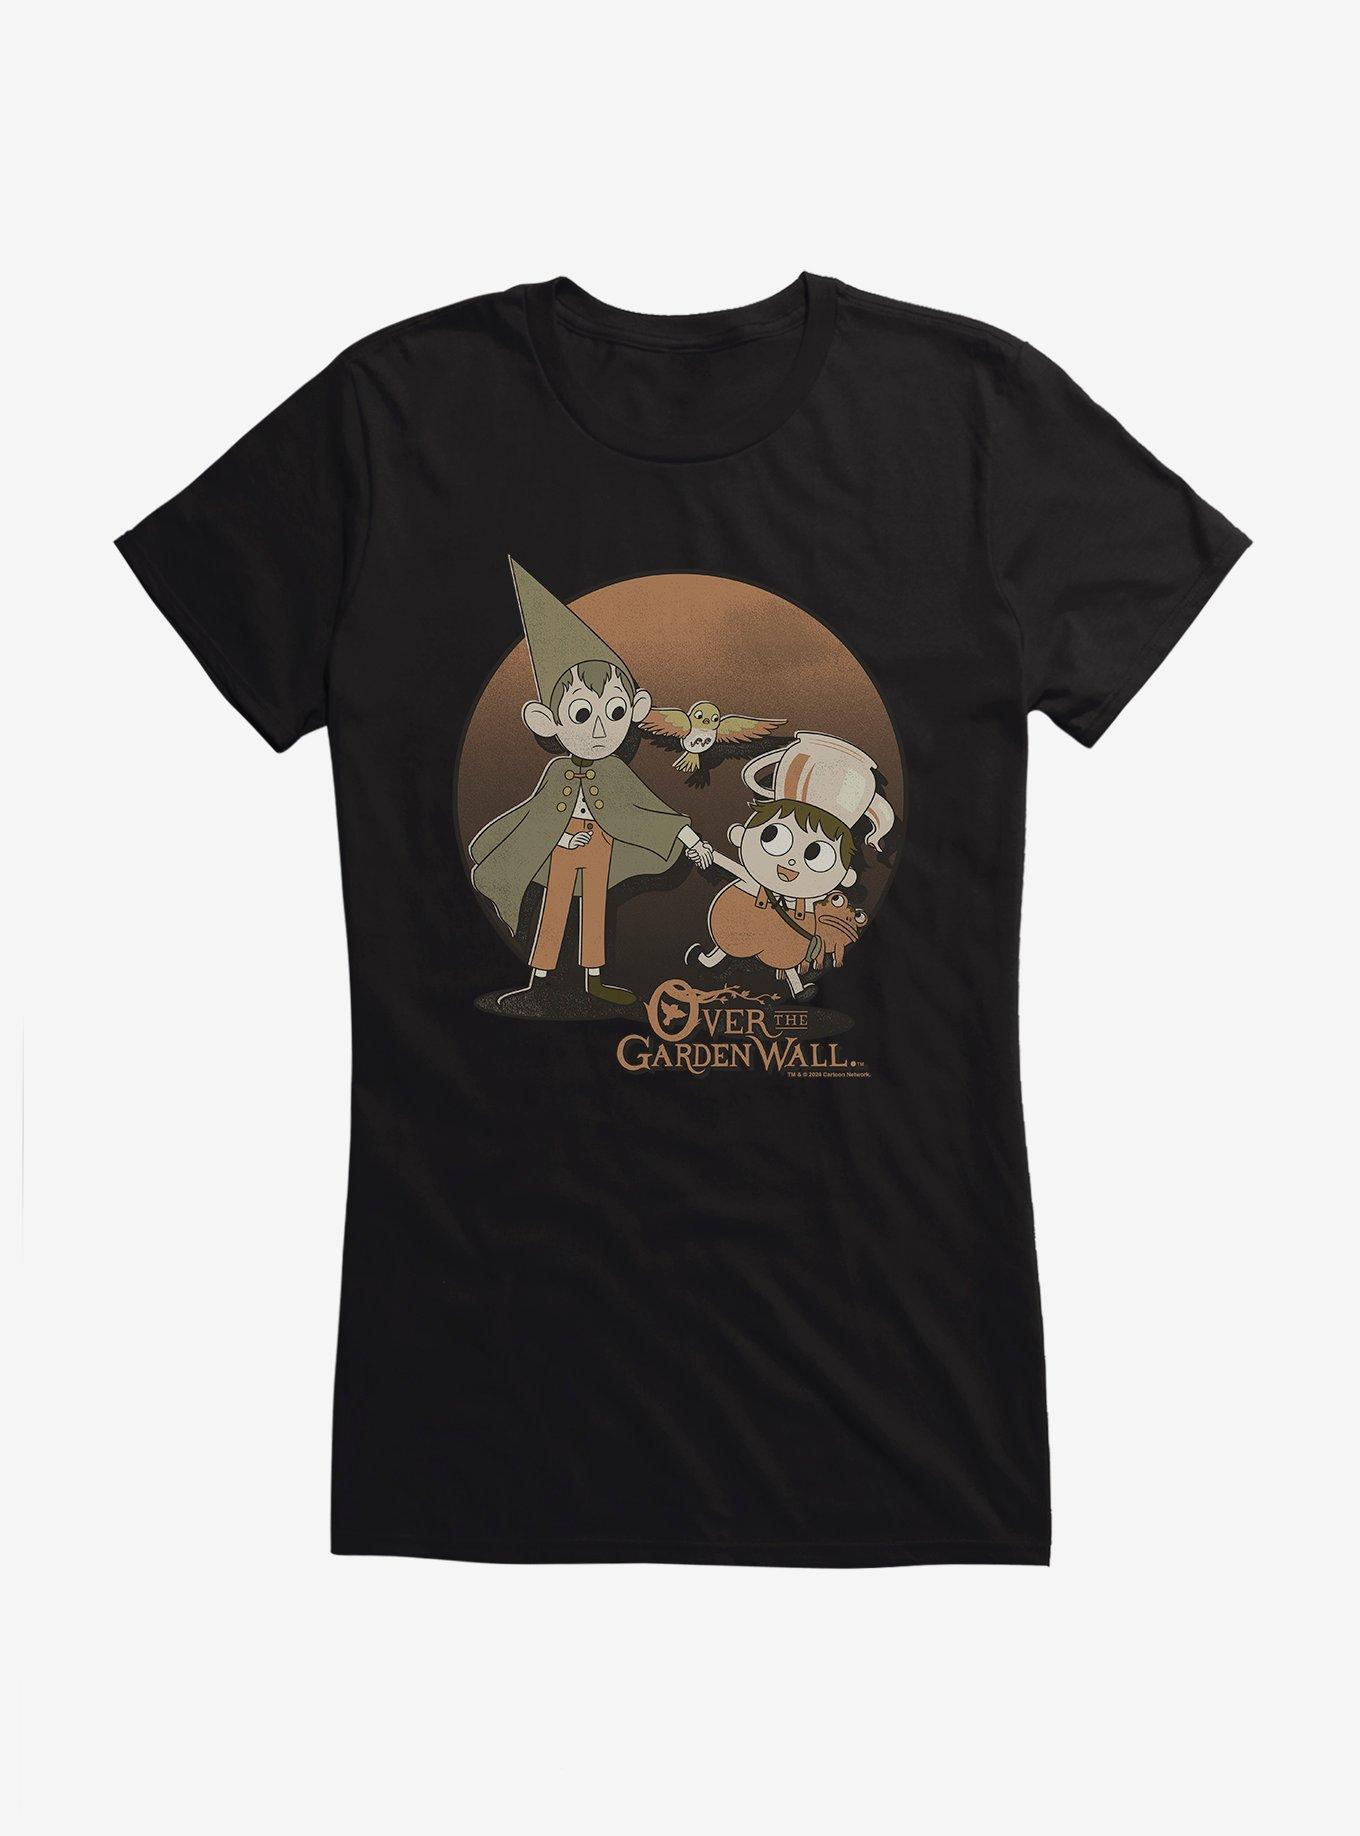 Over The Garden Wall Wirt And Greg Girls T-Shirt, BLACK, hi-res